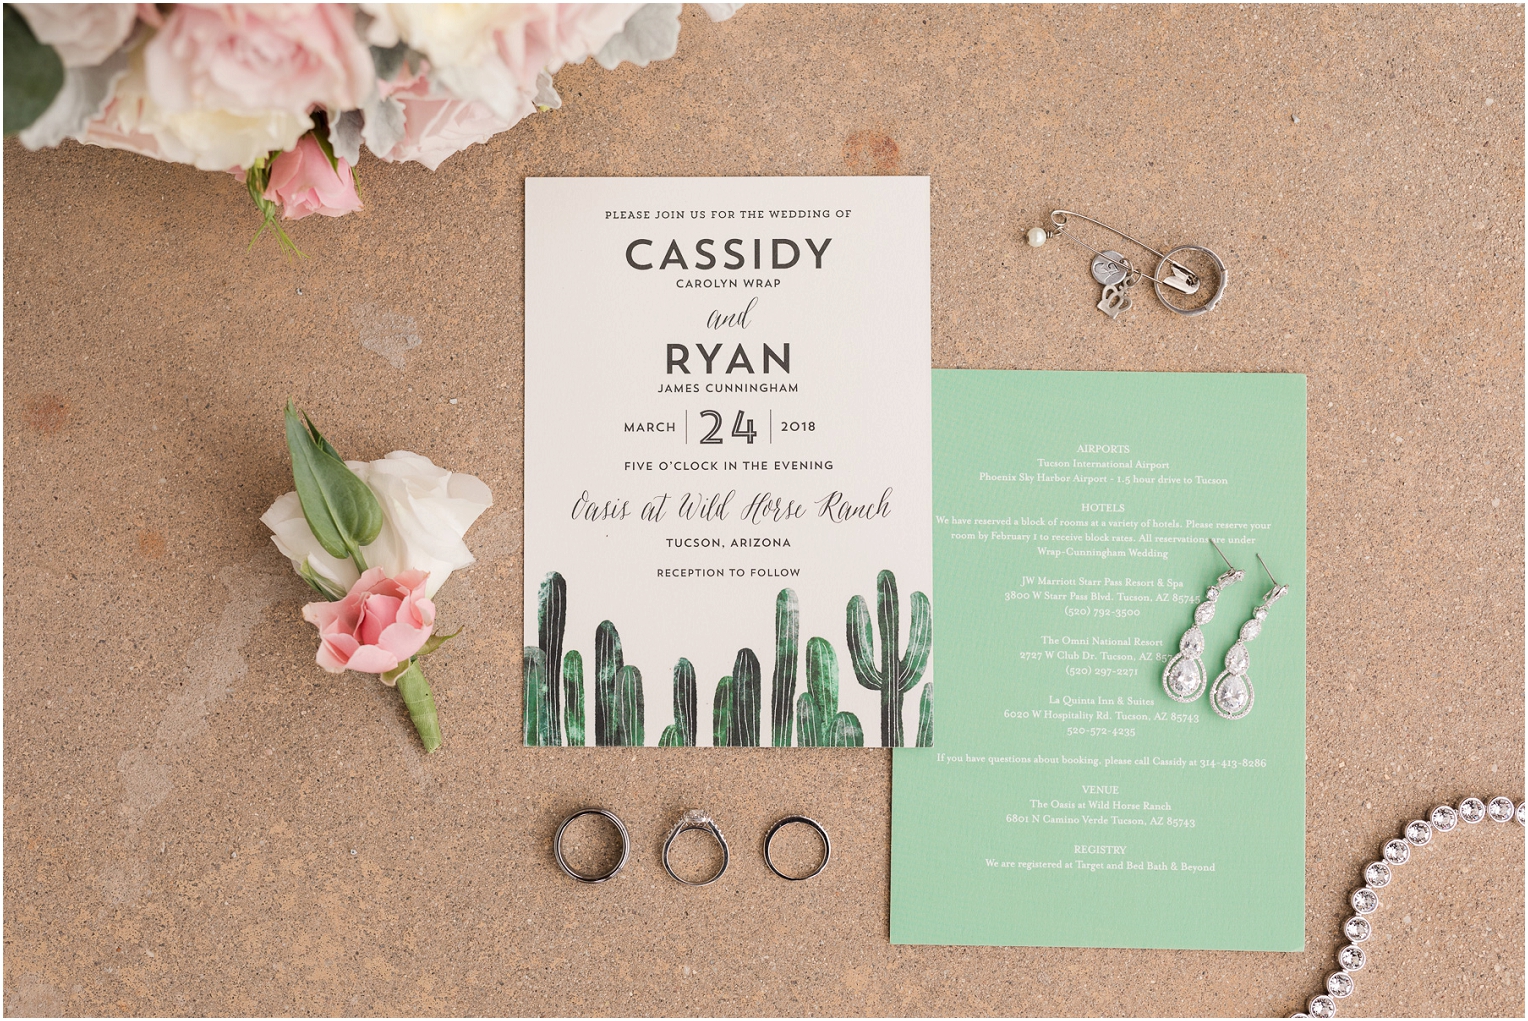 Oasis at Wild Horse Ranch Wedding Tucson AZ Cassidy and Ryan bridal details